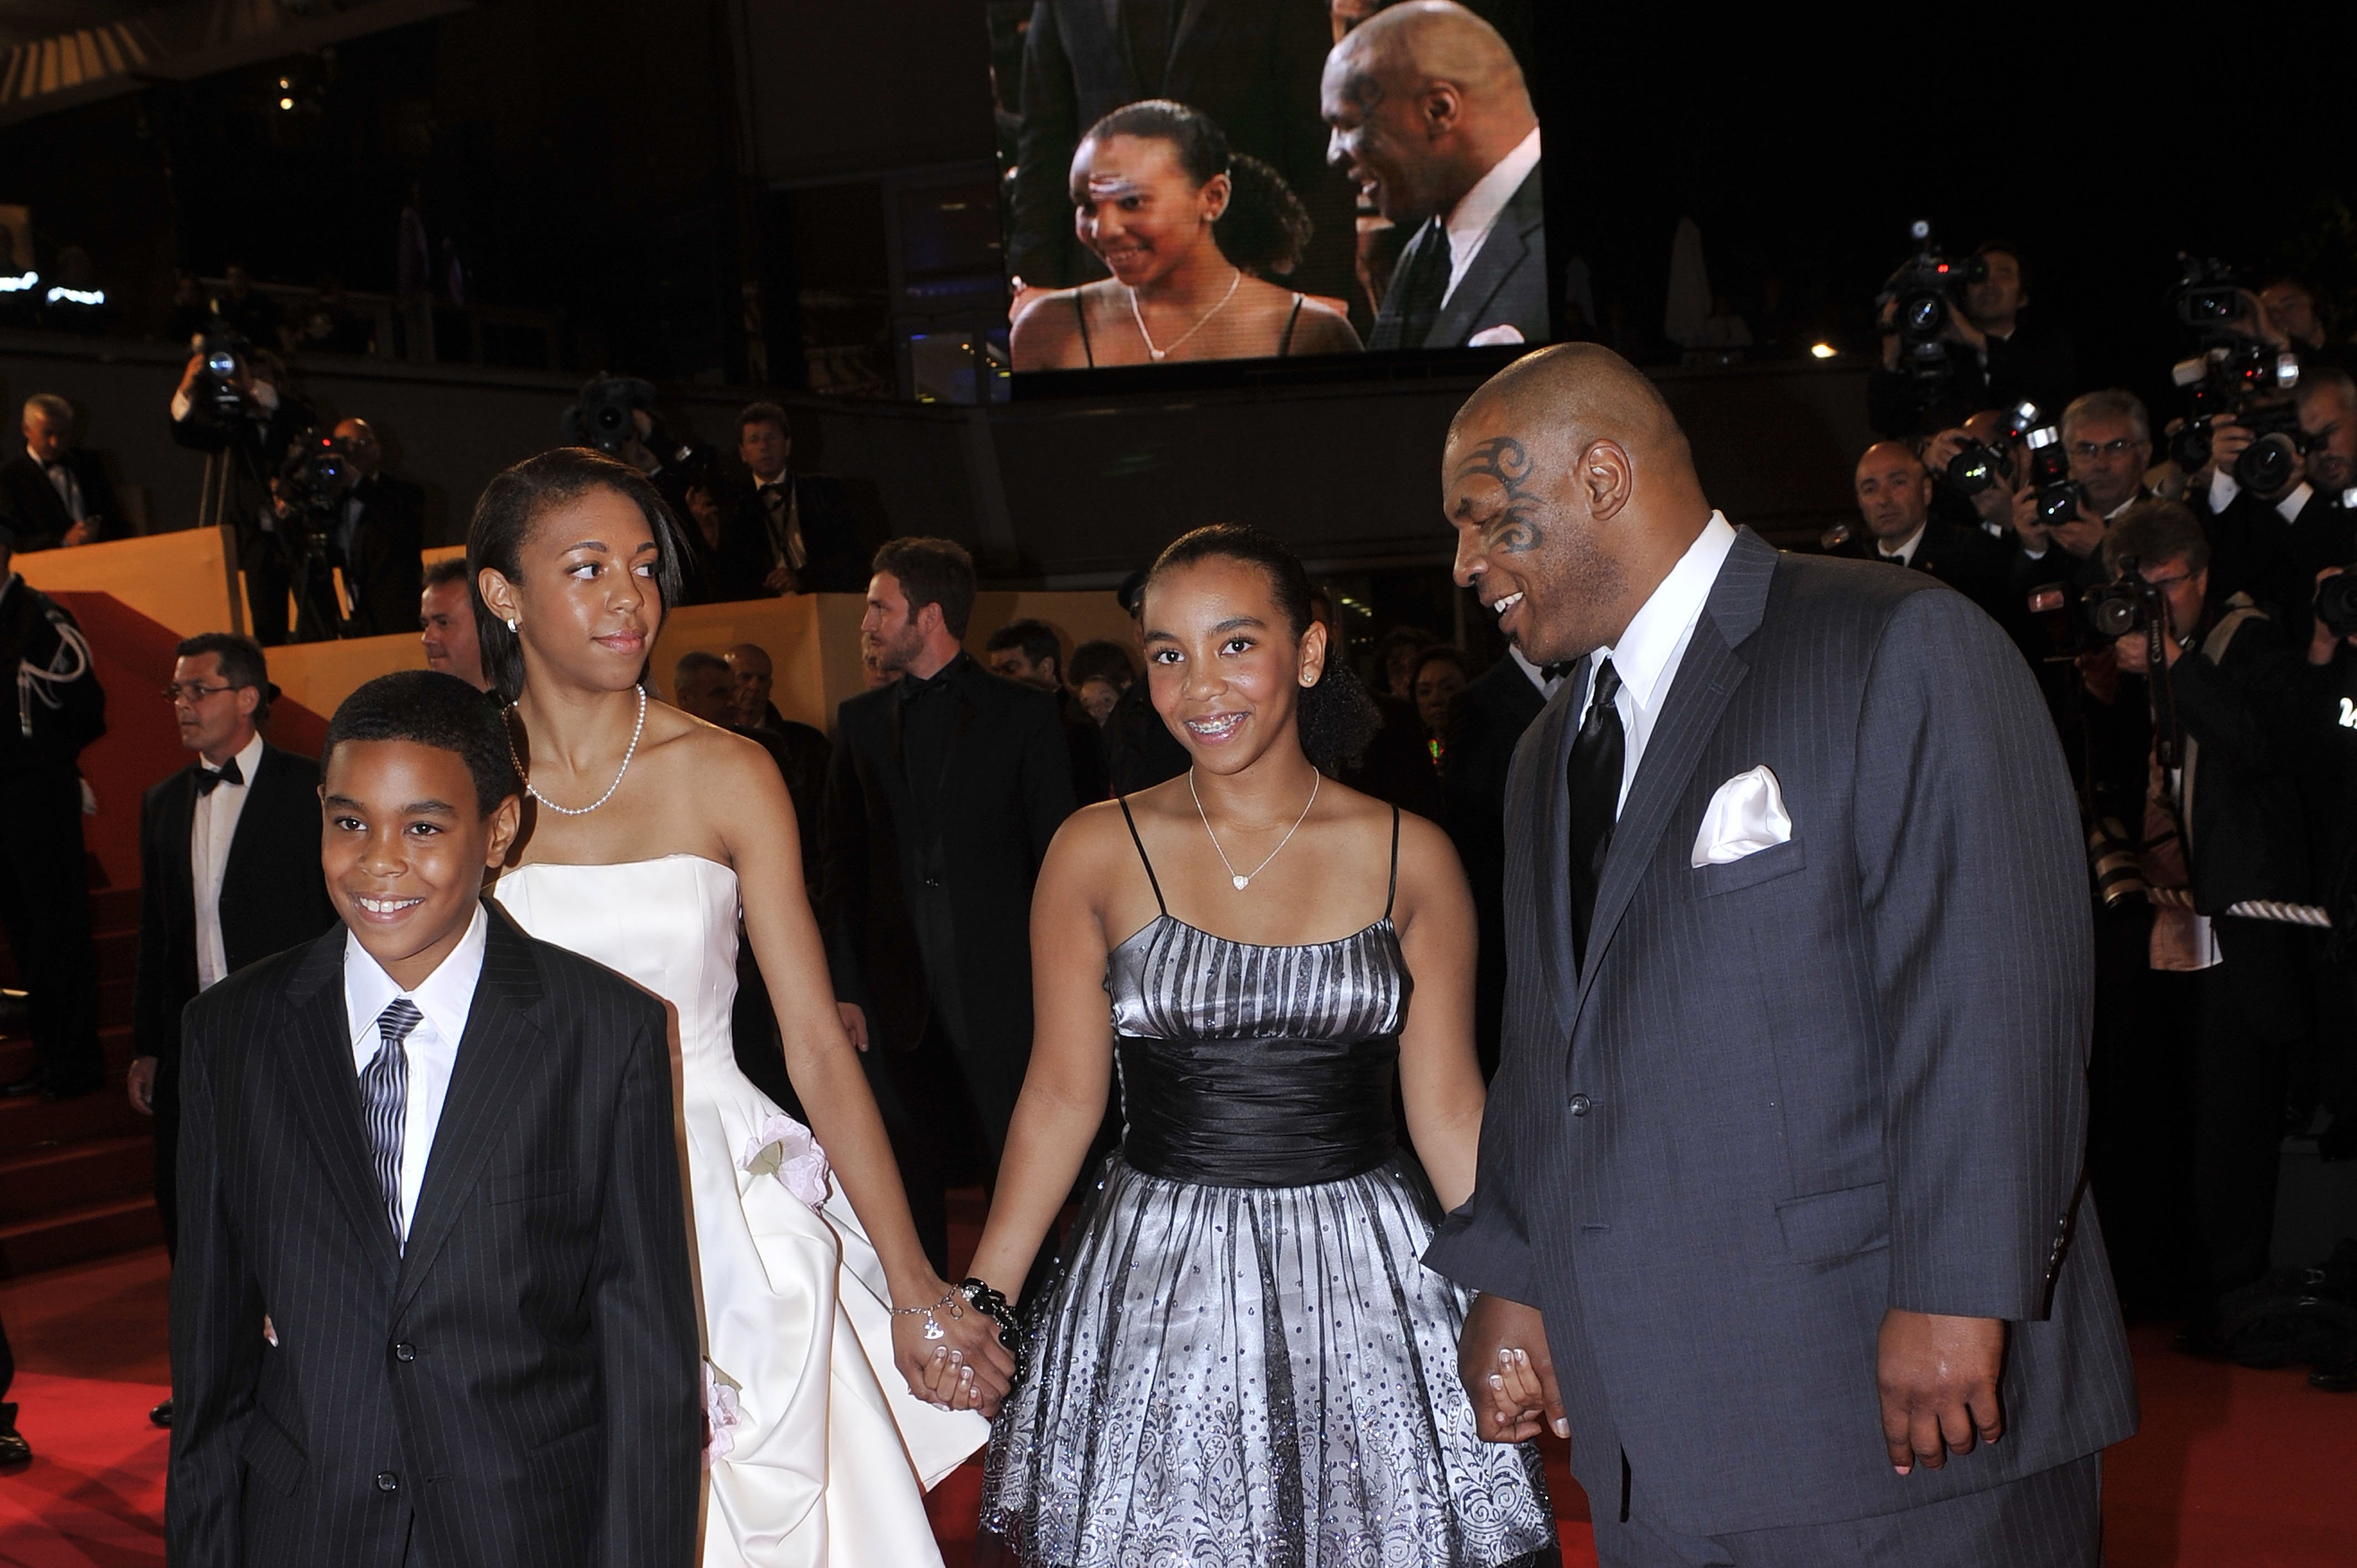 Mike Tyson with his family at the 61st Cannes Film Festival for the premiere of “Tyson.” | Source: Getty Images